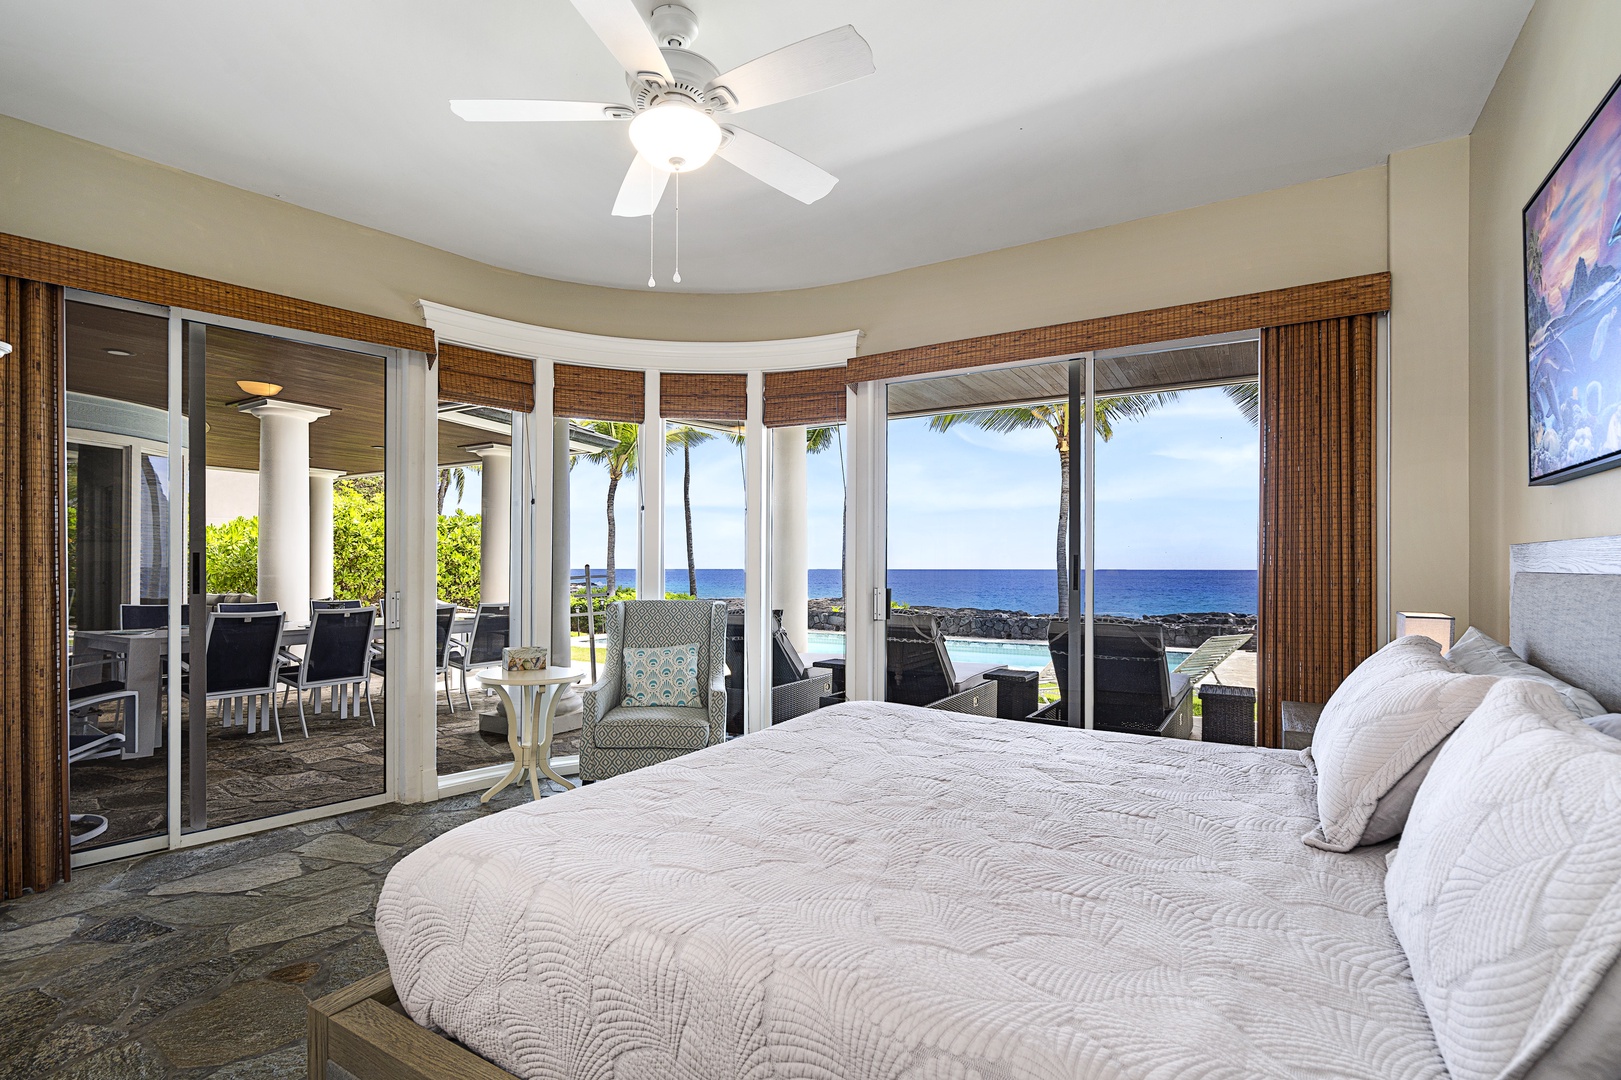 Kailua Kona Vacation Rentals, Kona Blue - Whether you prefer TV or the view of the ocean the choice is yours